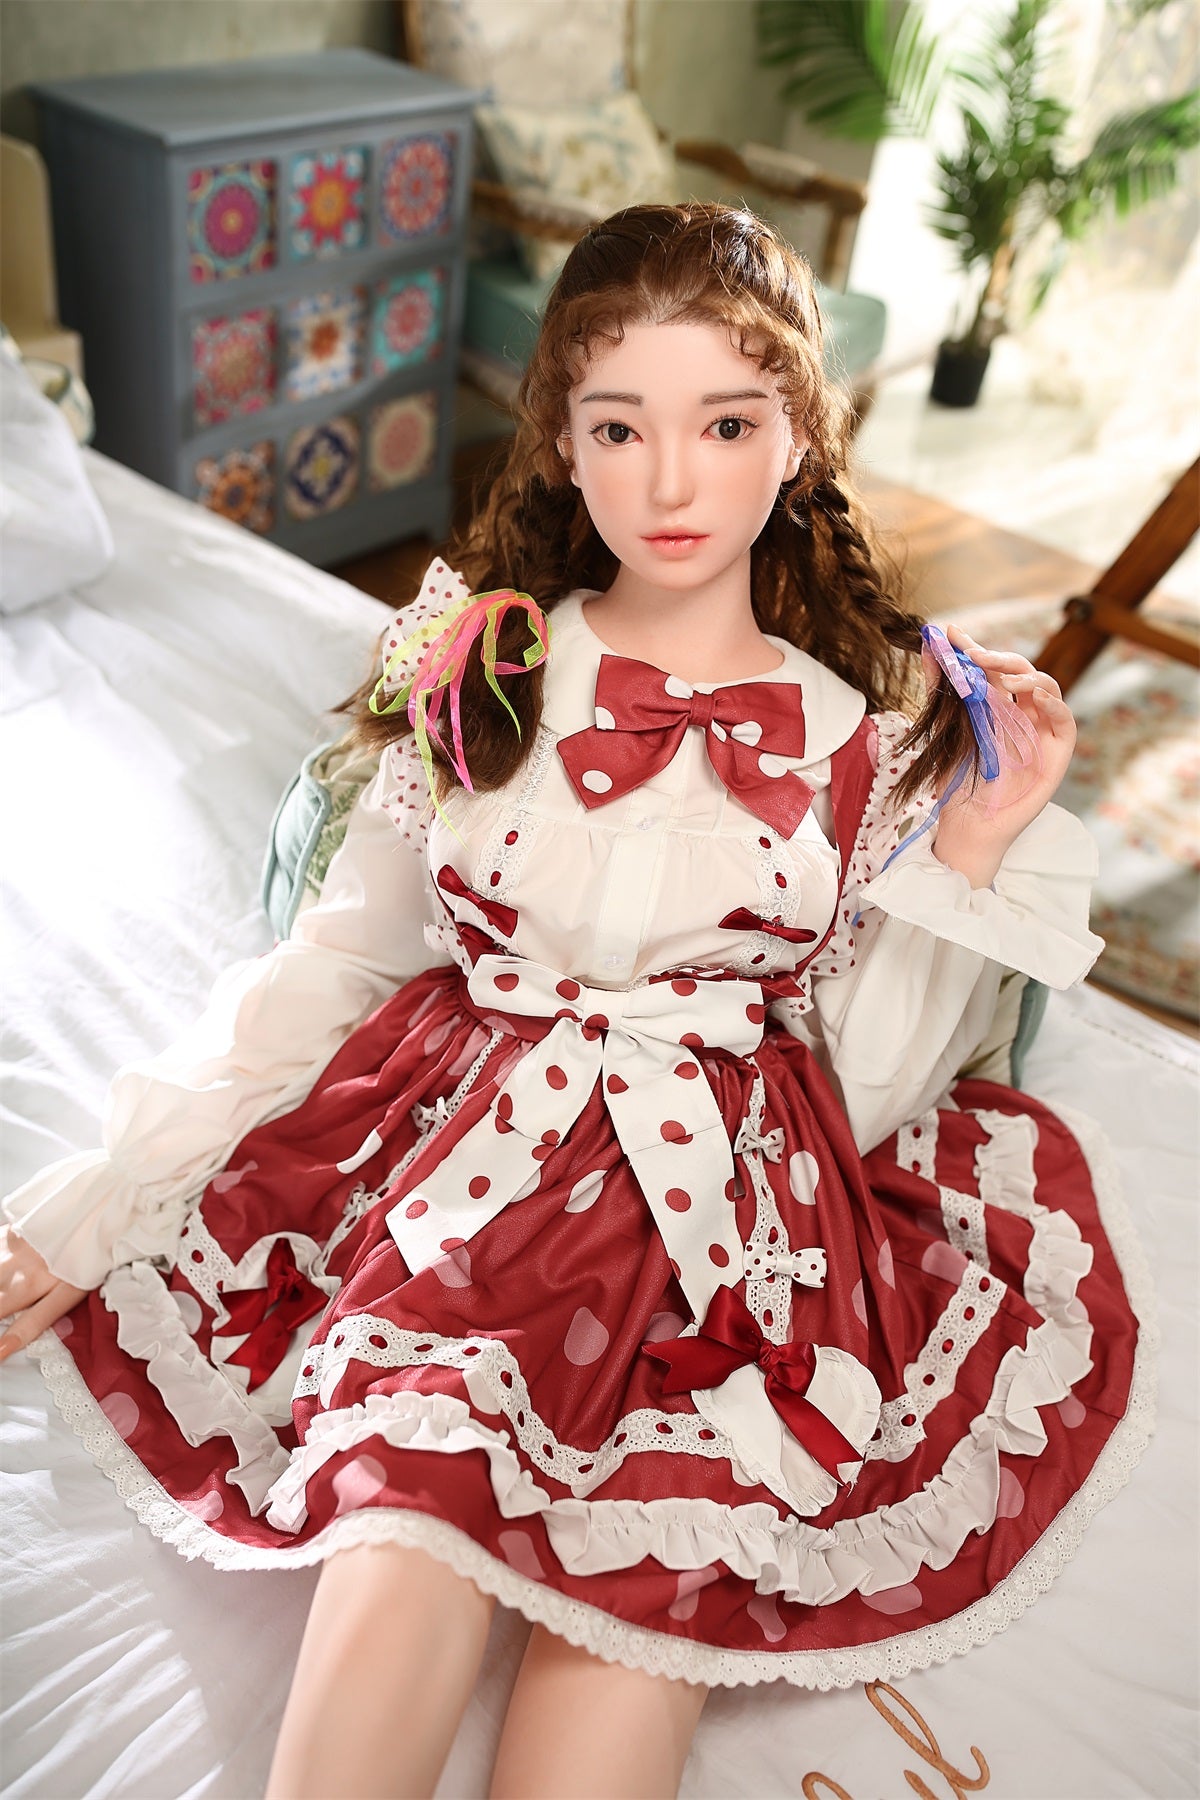 UMDOLL | Ruth - 5ft5(165cm) Top Quality Life-Like Sex Doll (Silicone Doll)-First Love Doll